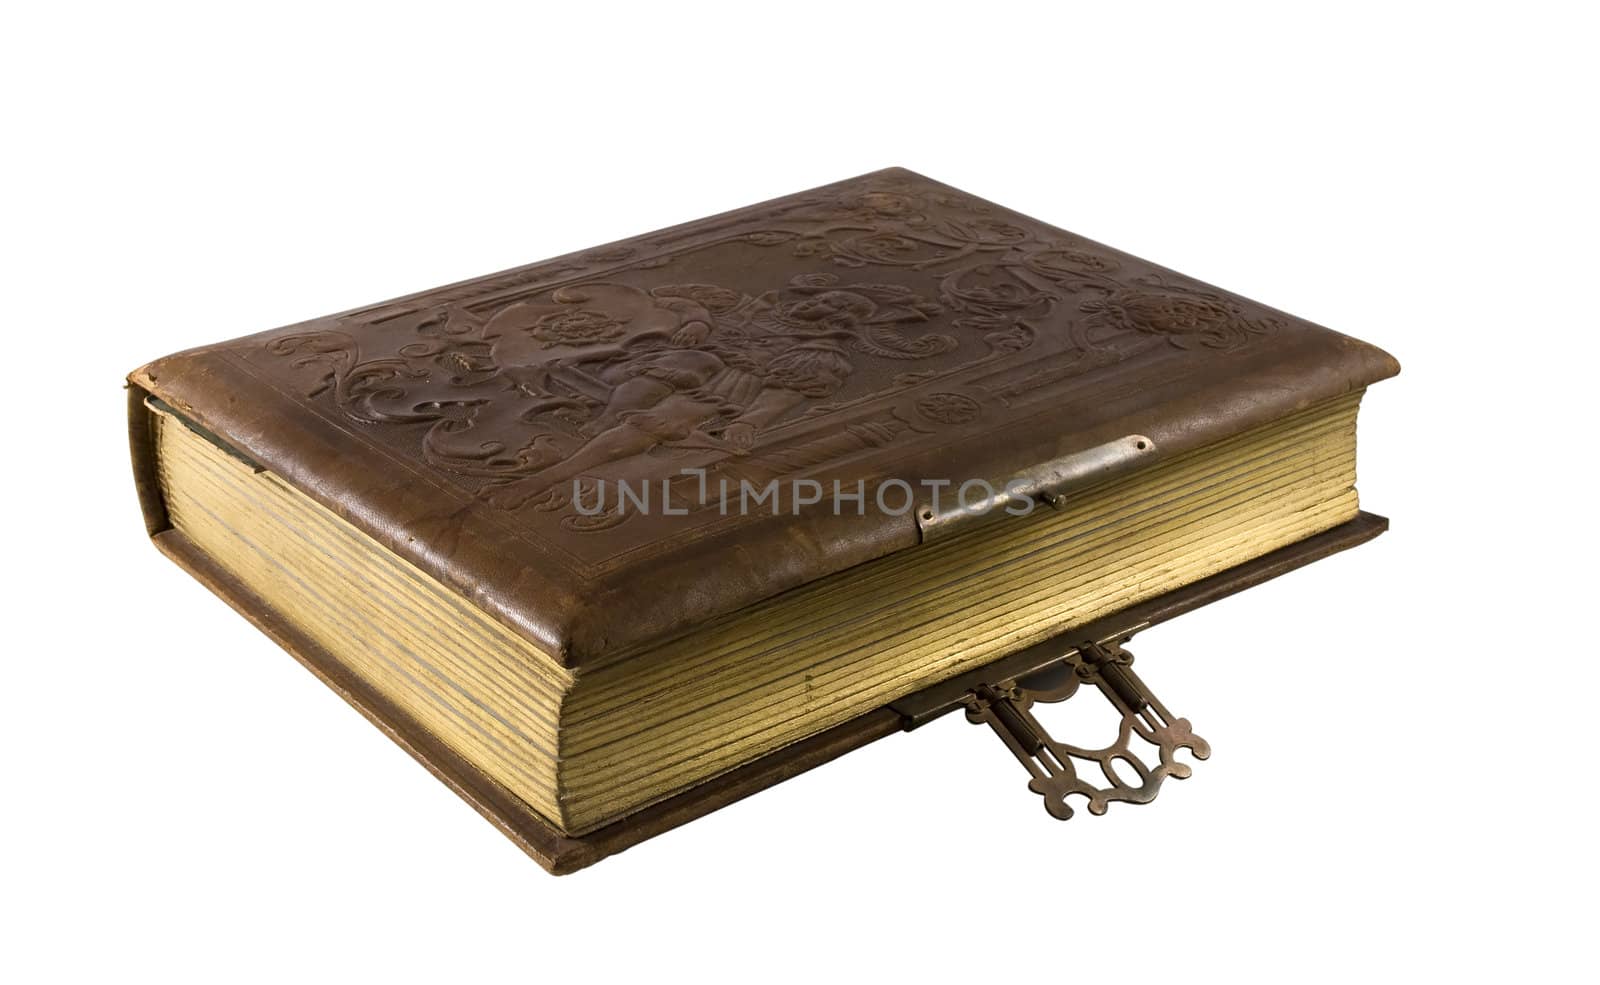 Old book with leather binding and gilt edging 